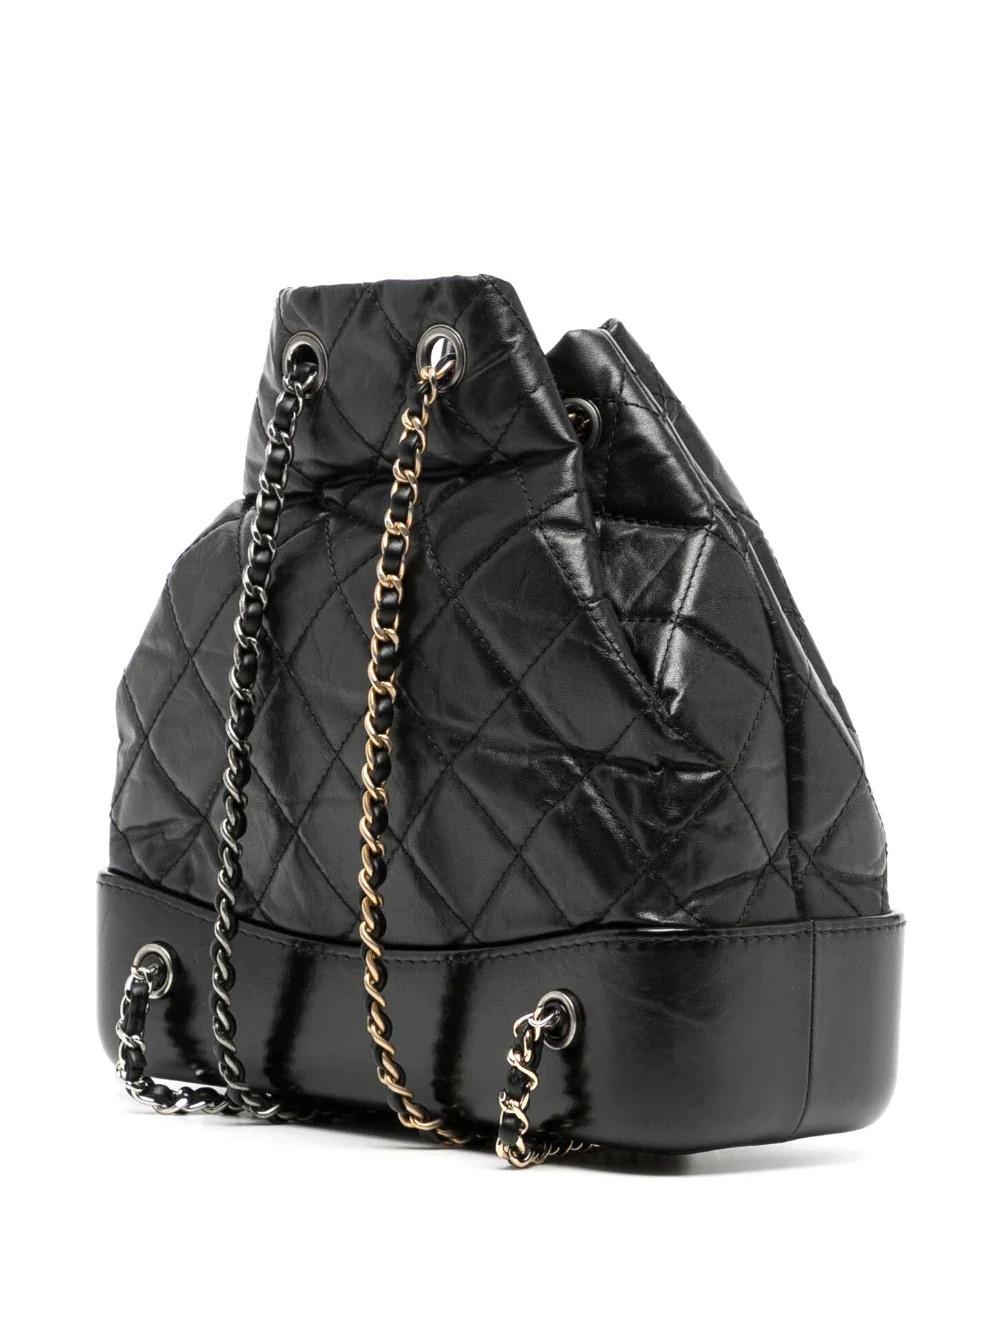 The Chanel Gabrielle Backpack is from a line designed by Karl Lagerfeld for the Spring/Summer 2017 Ready-to-wear show. It features aged black quilted leather, a sturdy base of smooth black leather, the iconic CC logo, and woven chain leather straps.